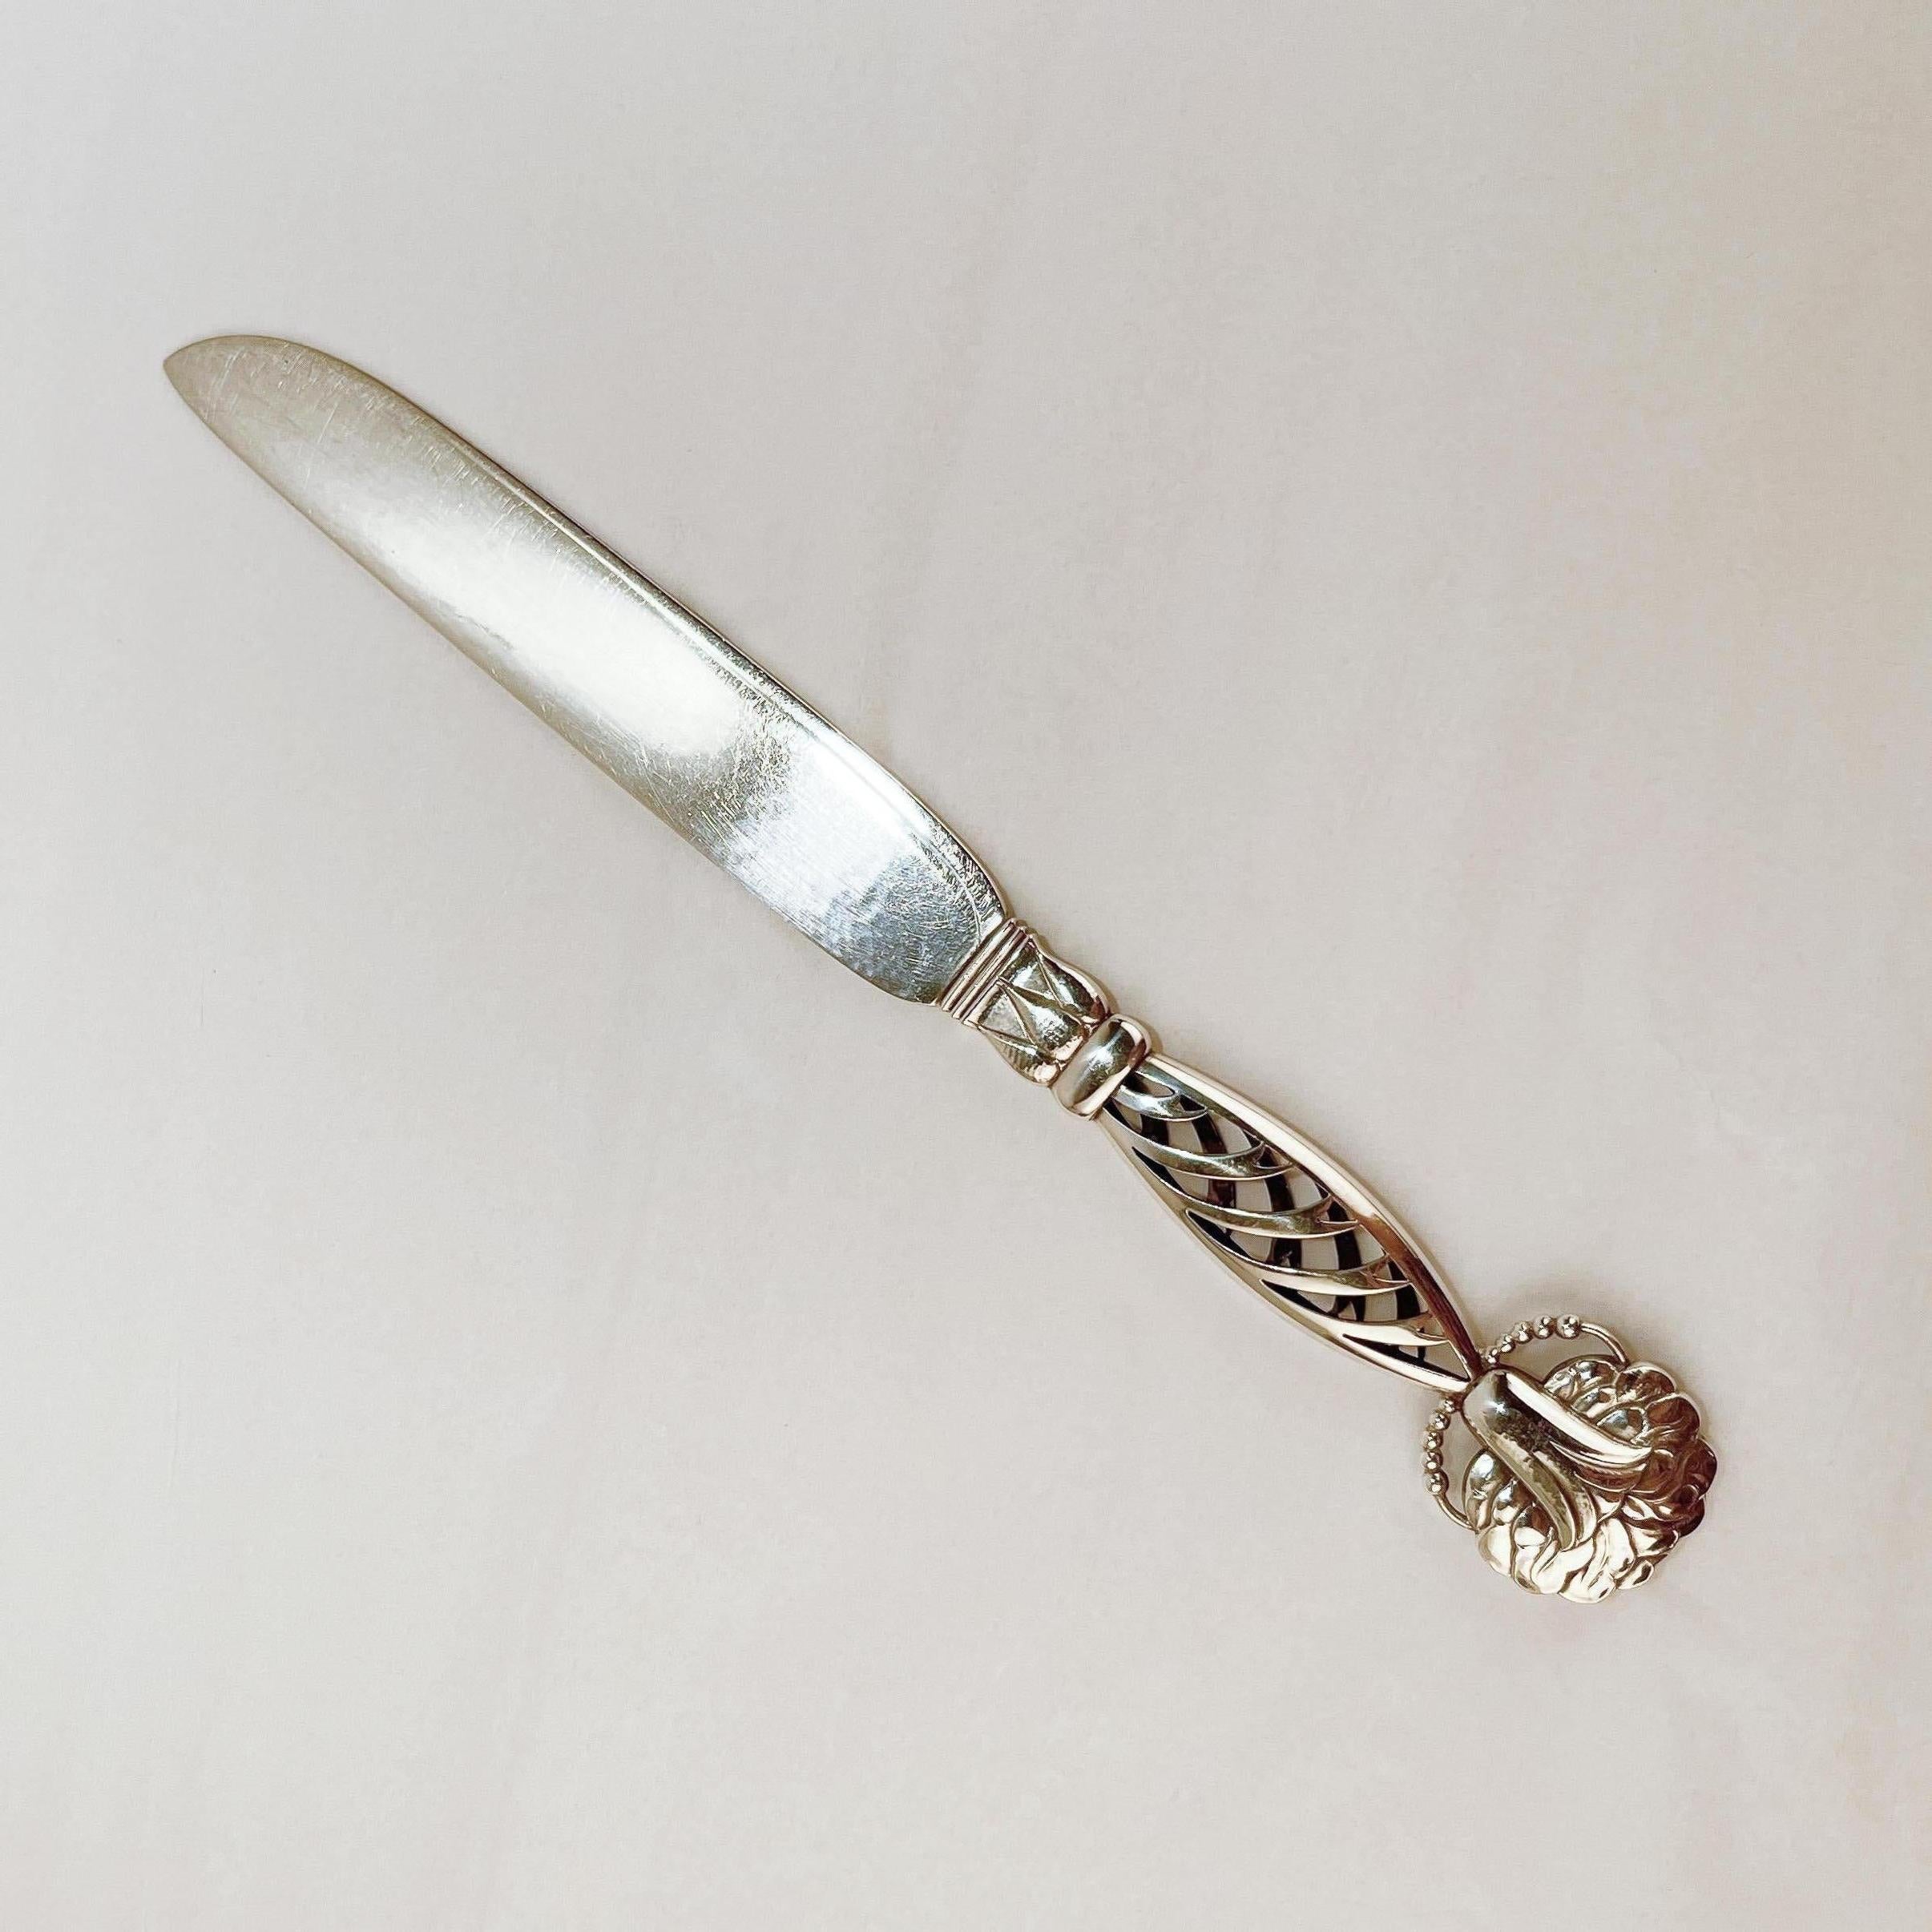 A fine cake knife by Georg Jensen.

Design no. 83 with an ornamental handle that has an openwork grip with a stylized flower.

The blade is hand-hammered.

Simply a terrific piece from a top-shelf silversmith!

Date:
20th Century

Overall